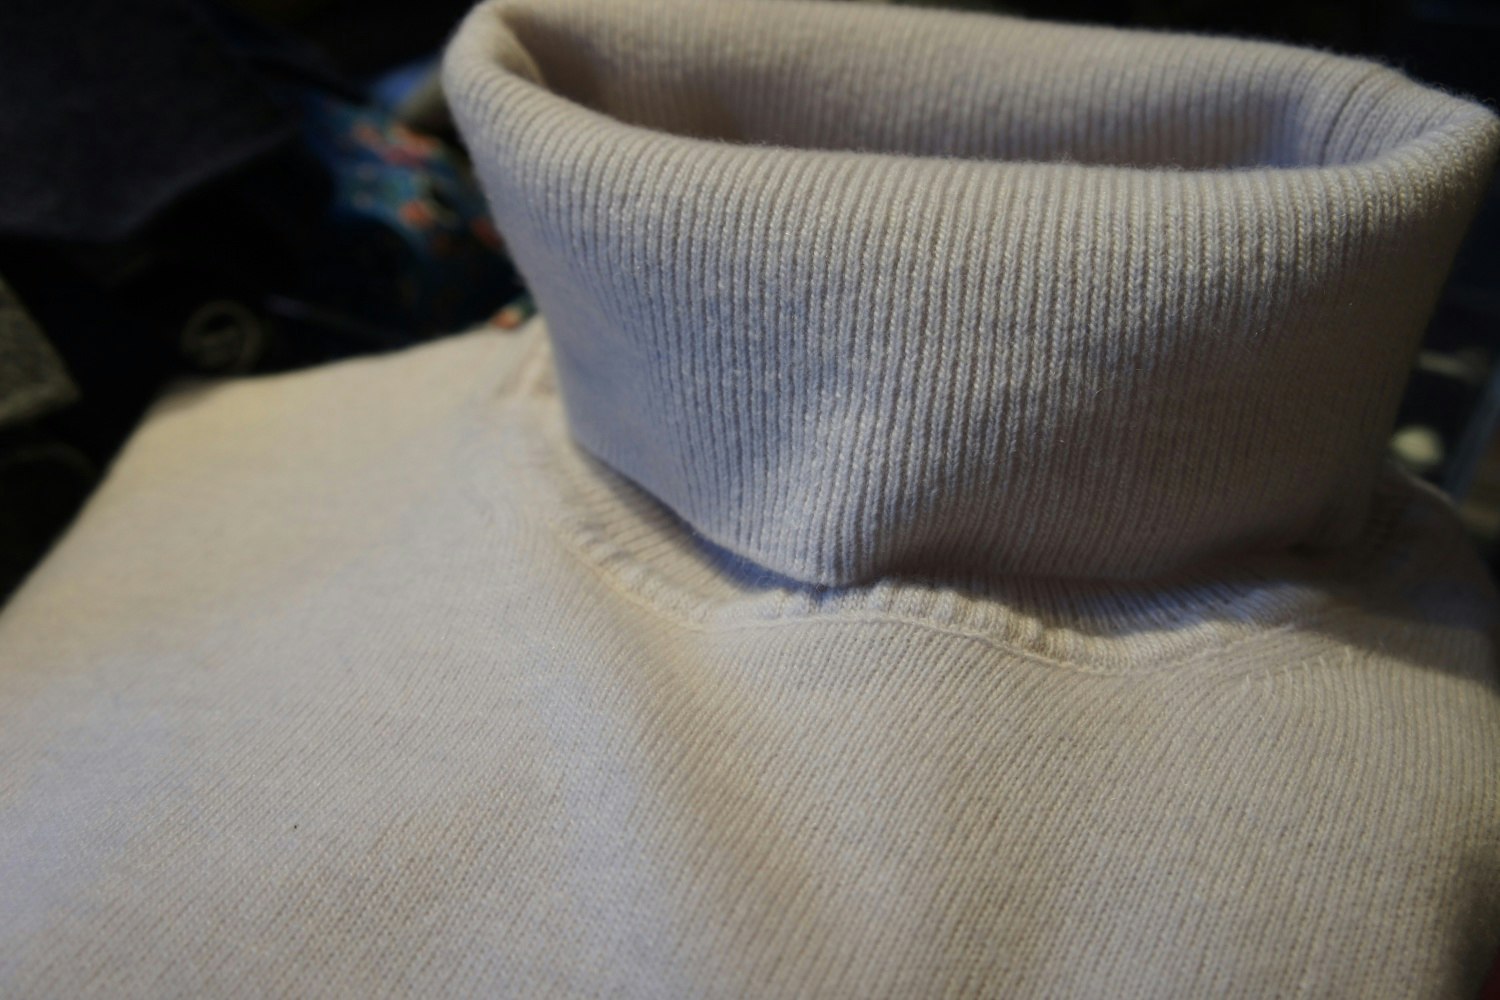 White Rollneck Cashmere Wool Pullover - Off White